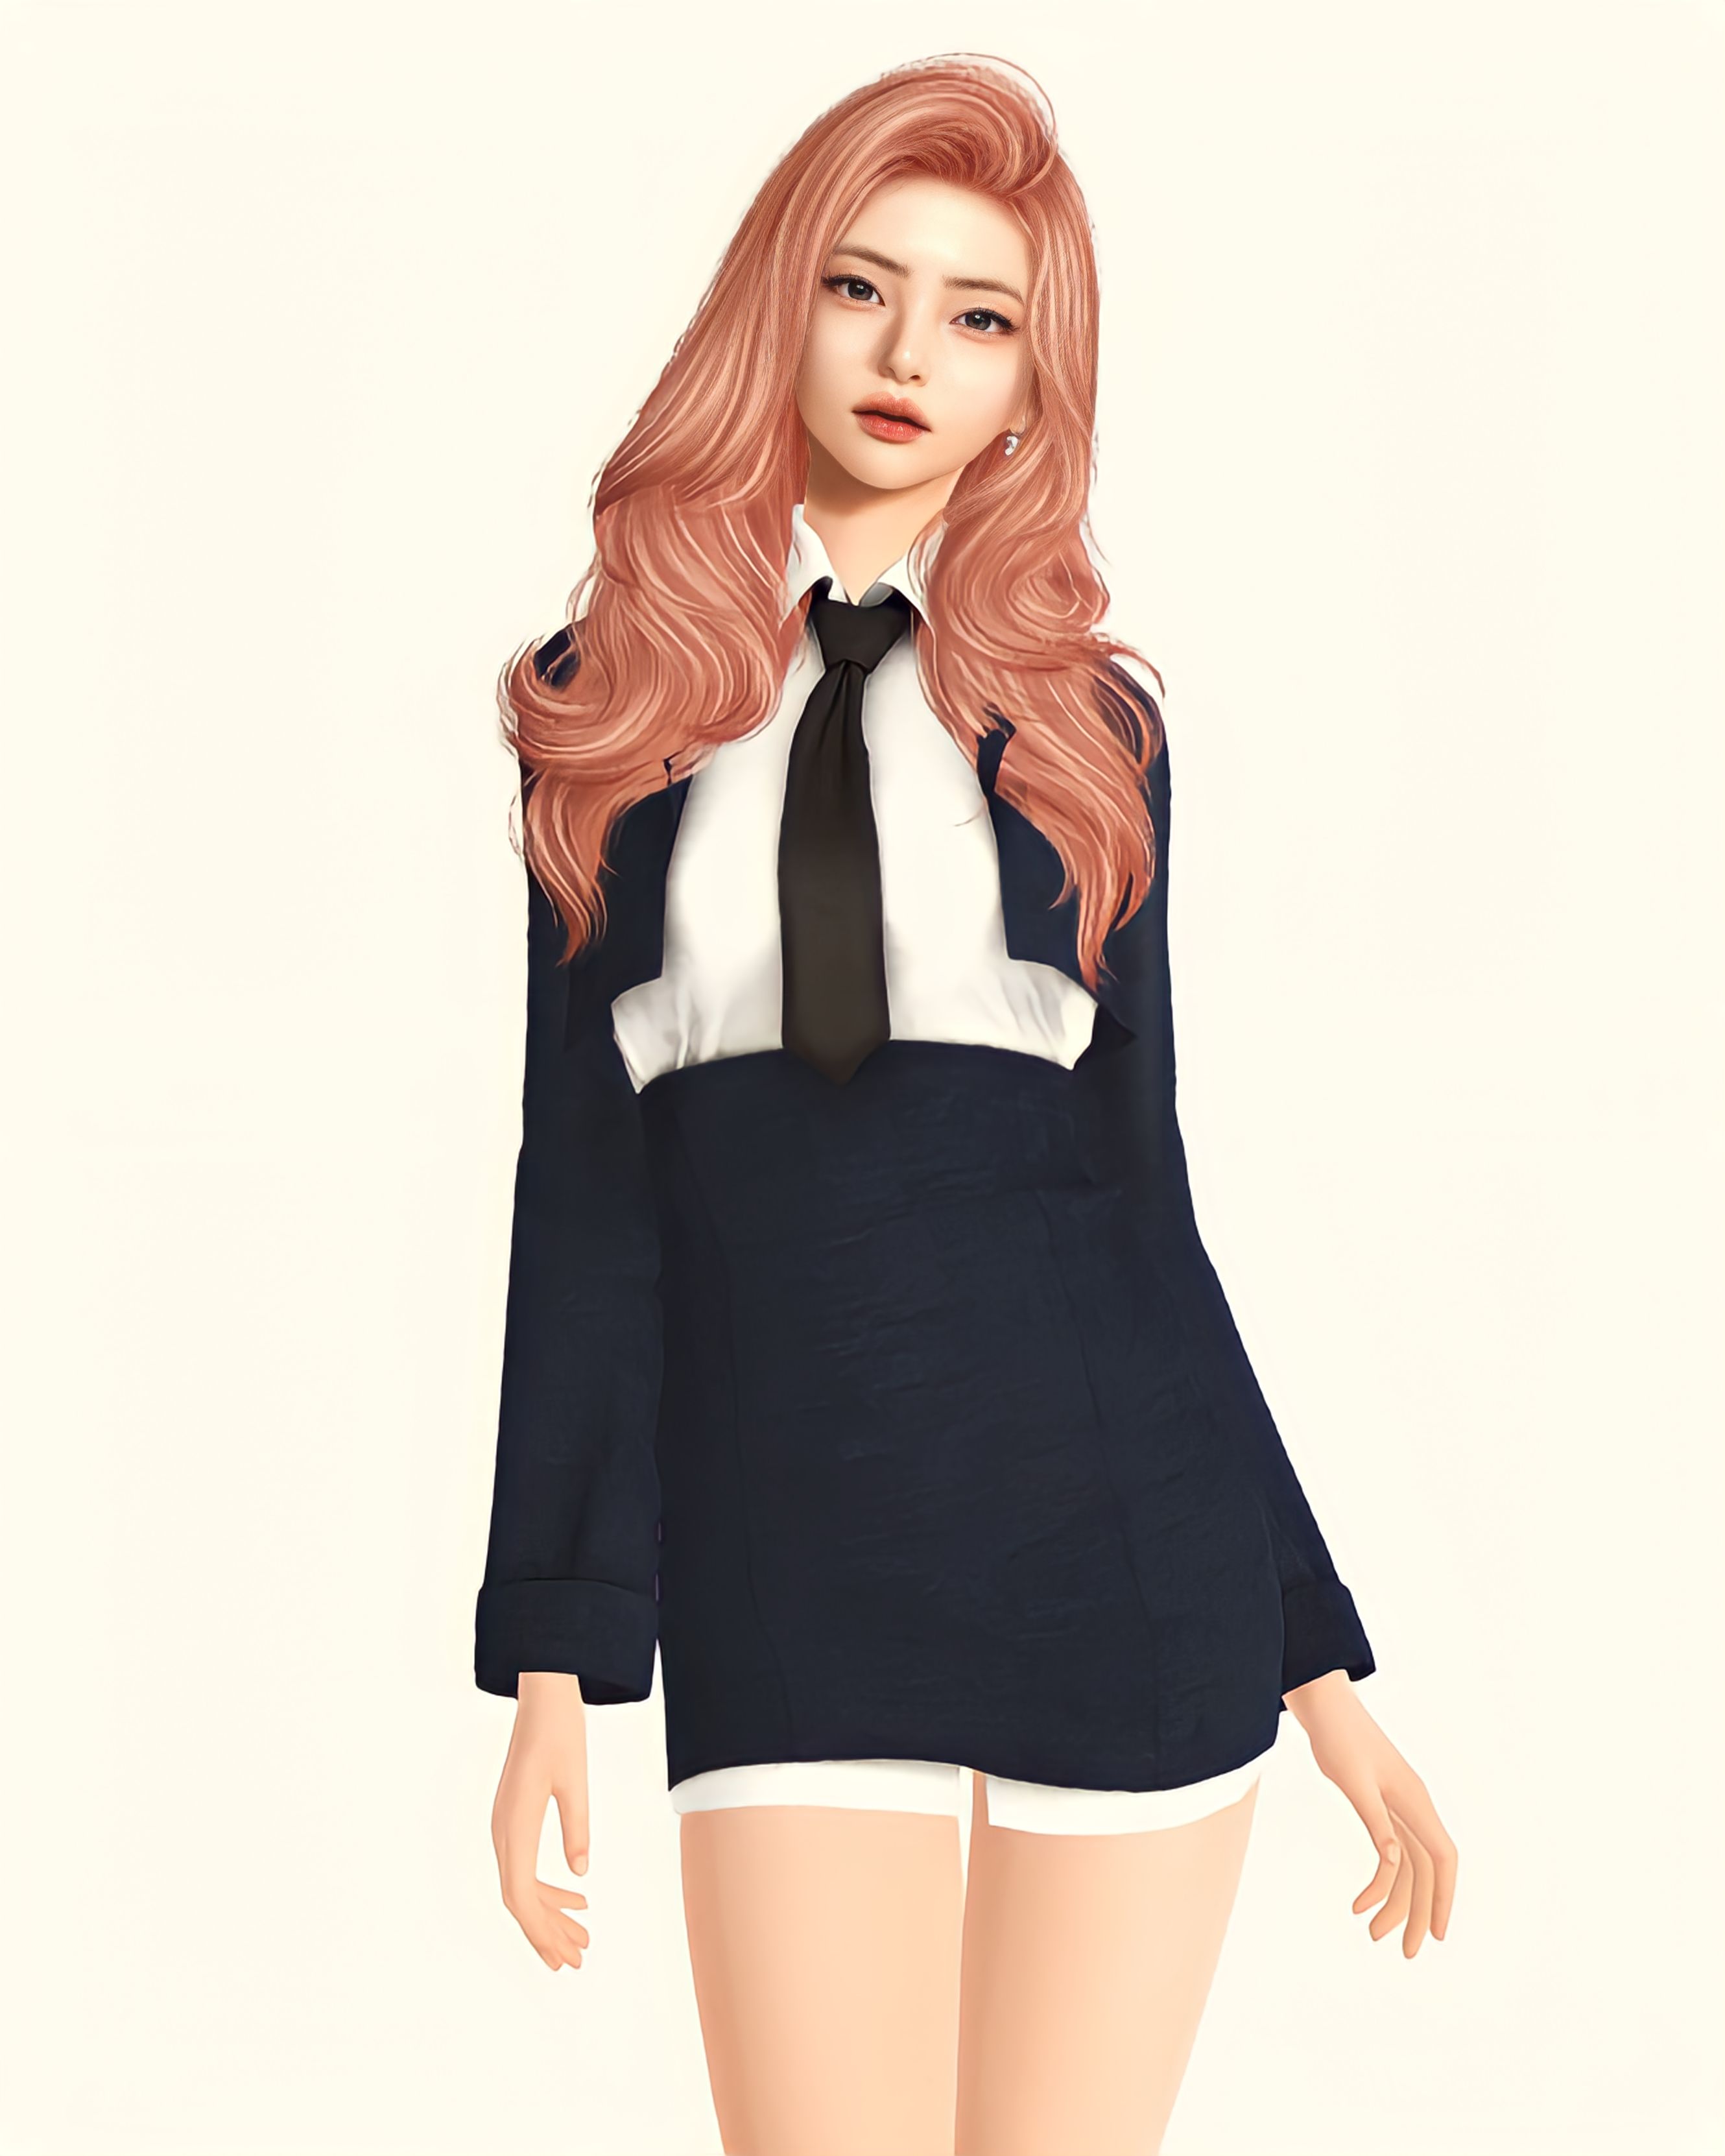 Lauren Currie - The Sims 4 Sims / Households - CurseForge